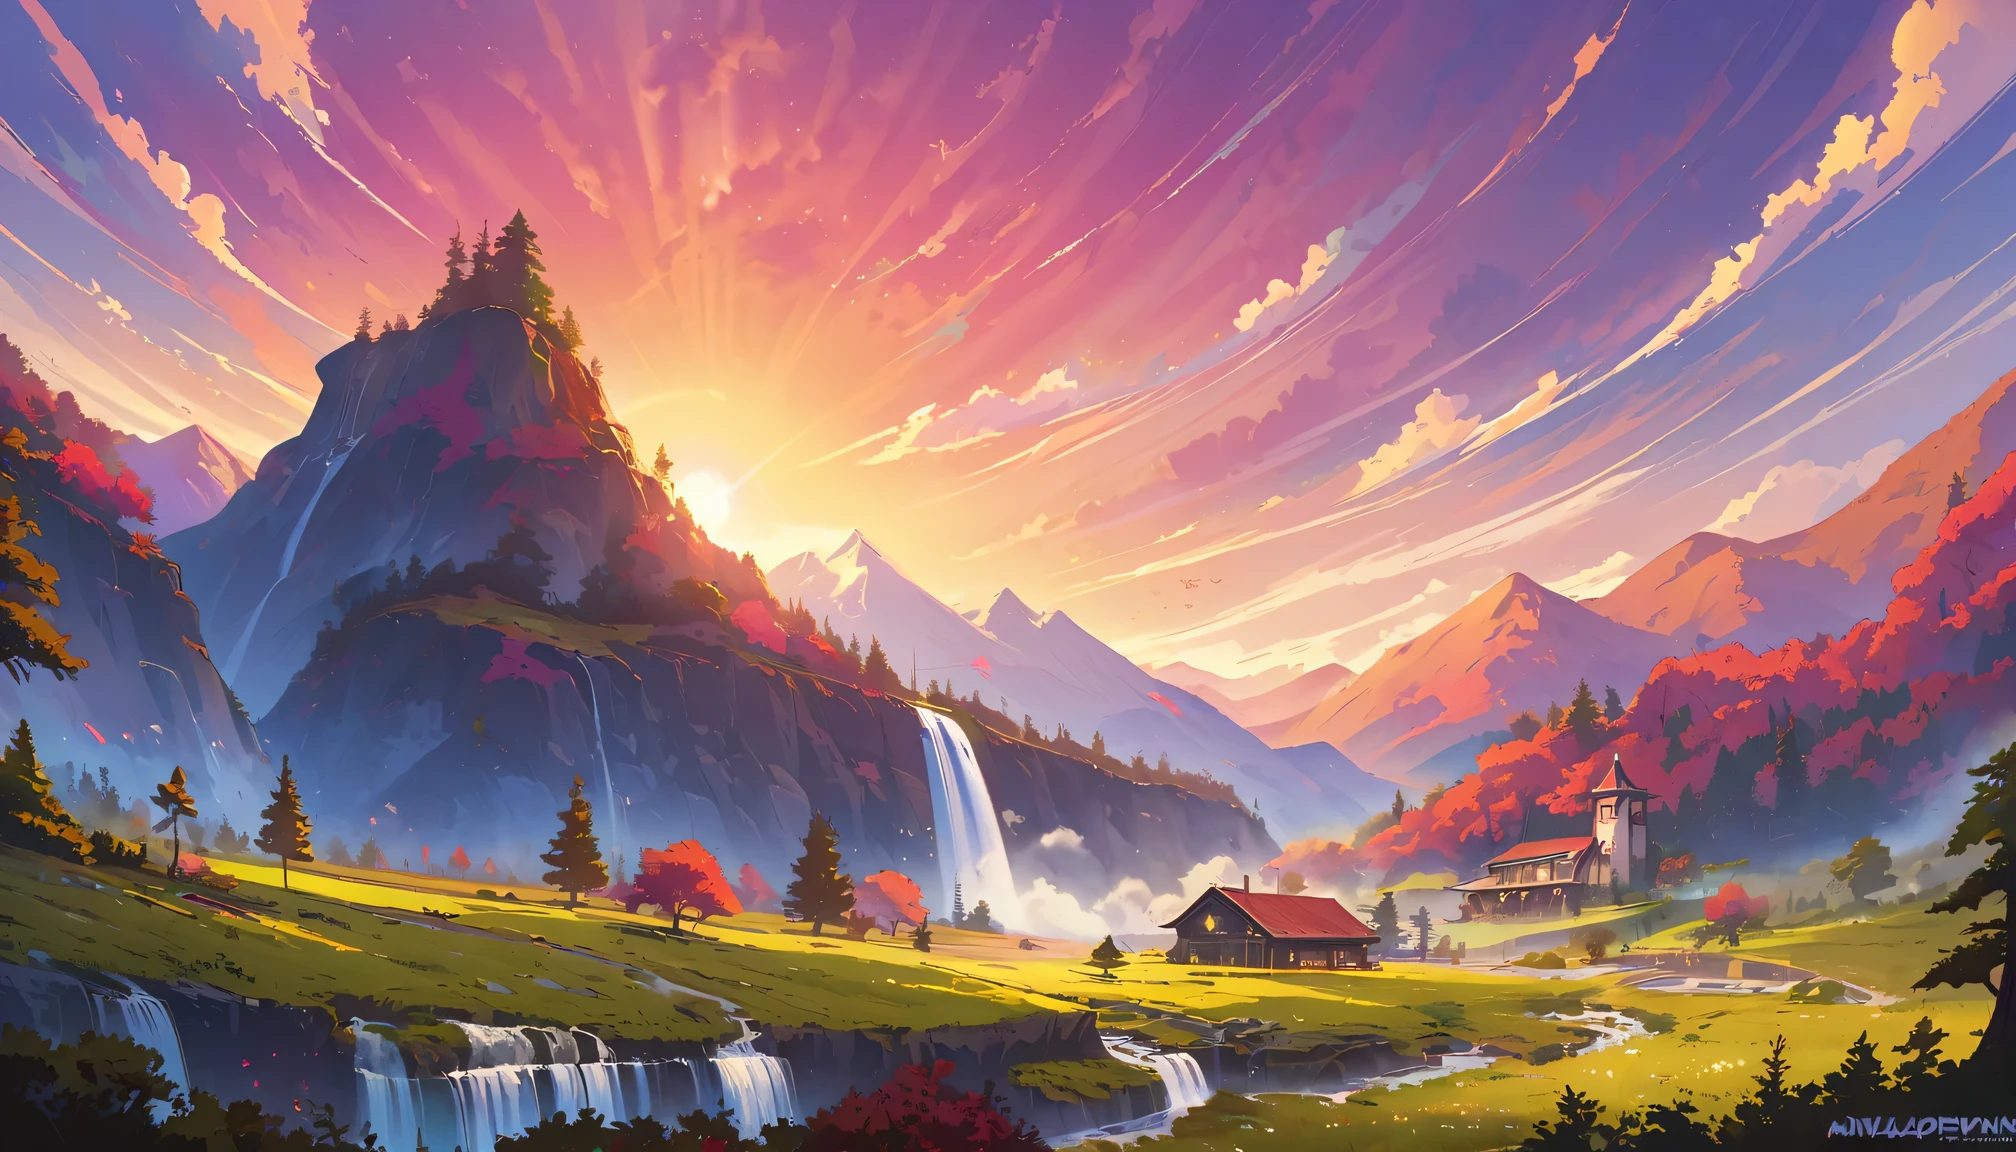 super wide angle, Chroma V5, Wink Punk, analogy style, a beautiful house，Located on a beautiful mountain，The hills are filled with super detailed spring pink trees, Set against the backdrop of a beautiful and authentic waterfall, Beautiful spectacular sunset, concept art, Artwork by Greg Rutkowski and Albert Bierstadt, Art station fashion trends, painting, octane rendering, cinematic